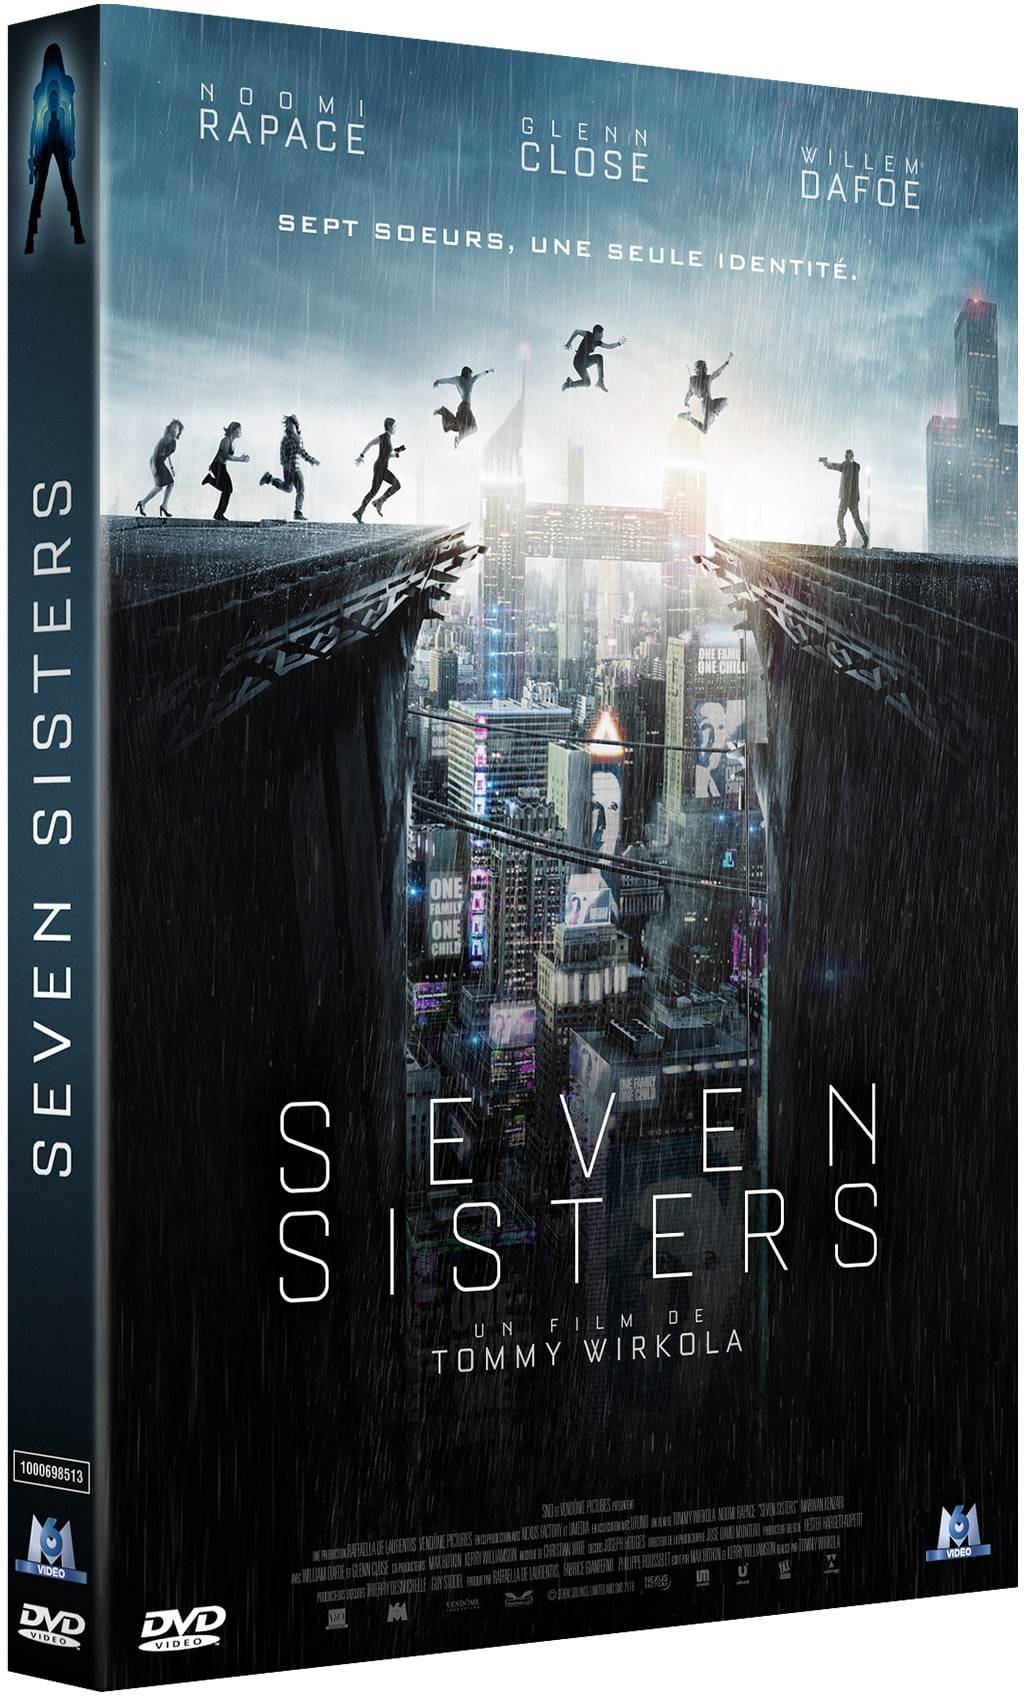 DVD_Seven Sisters